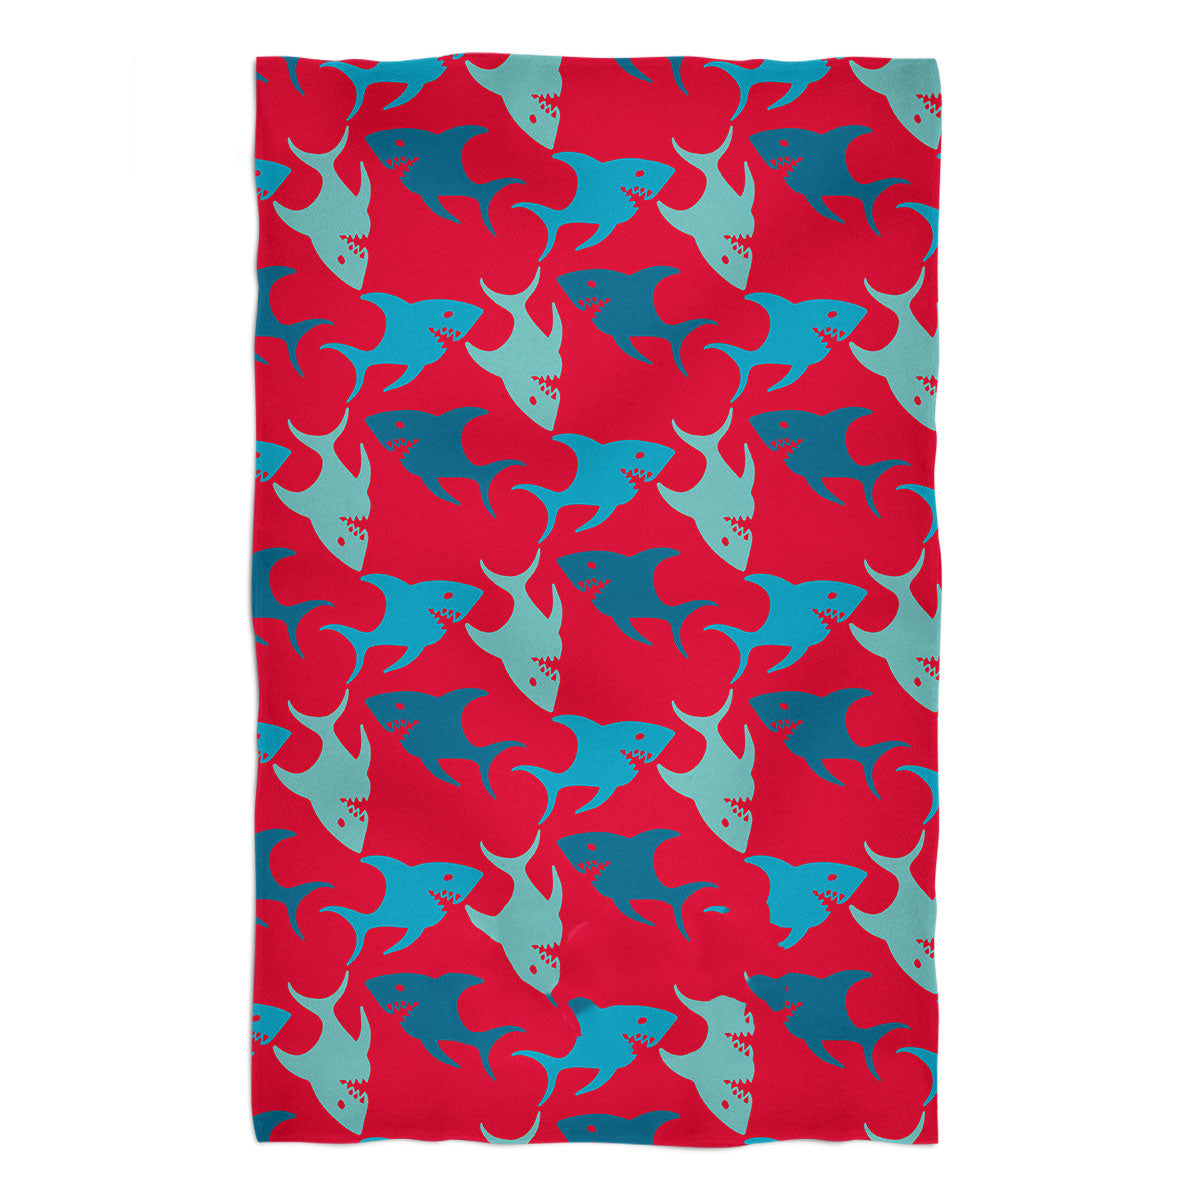 Sharks Print Name Red Towel 51 X 32 - Wimziy&Co.